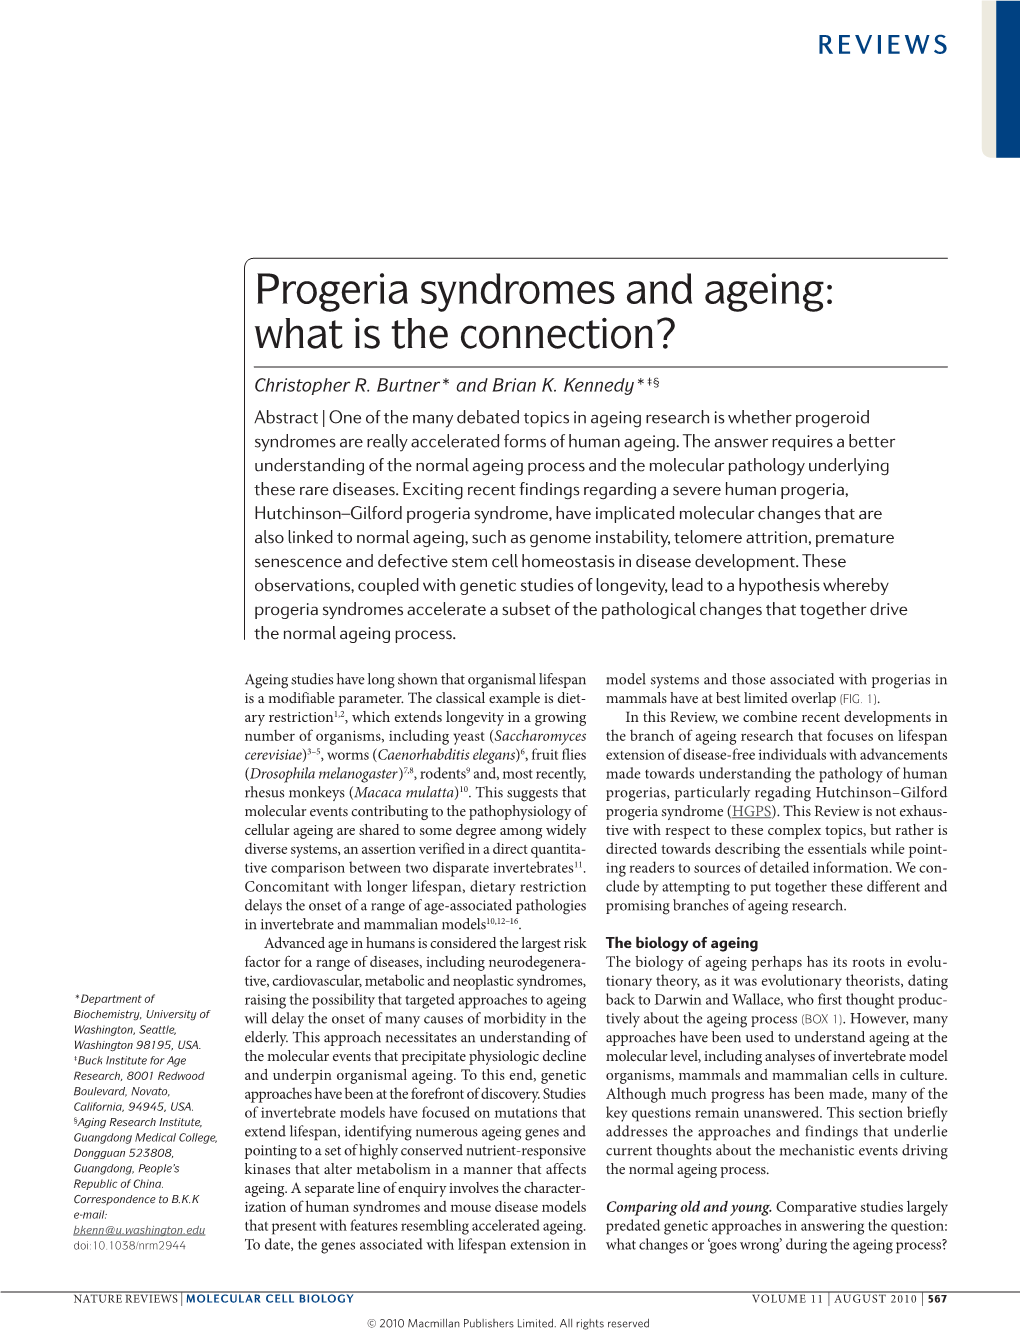 Progeria Syndromes and Ageing: What Is the Connection?